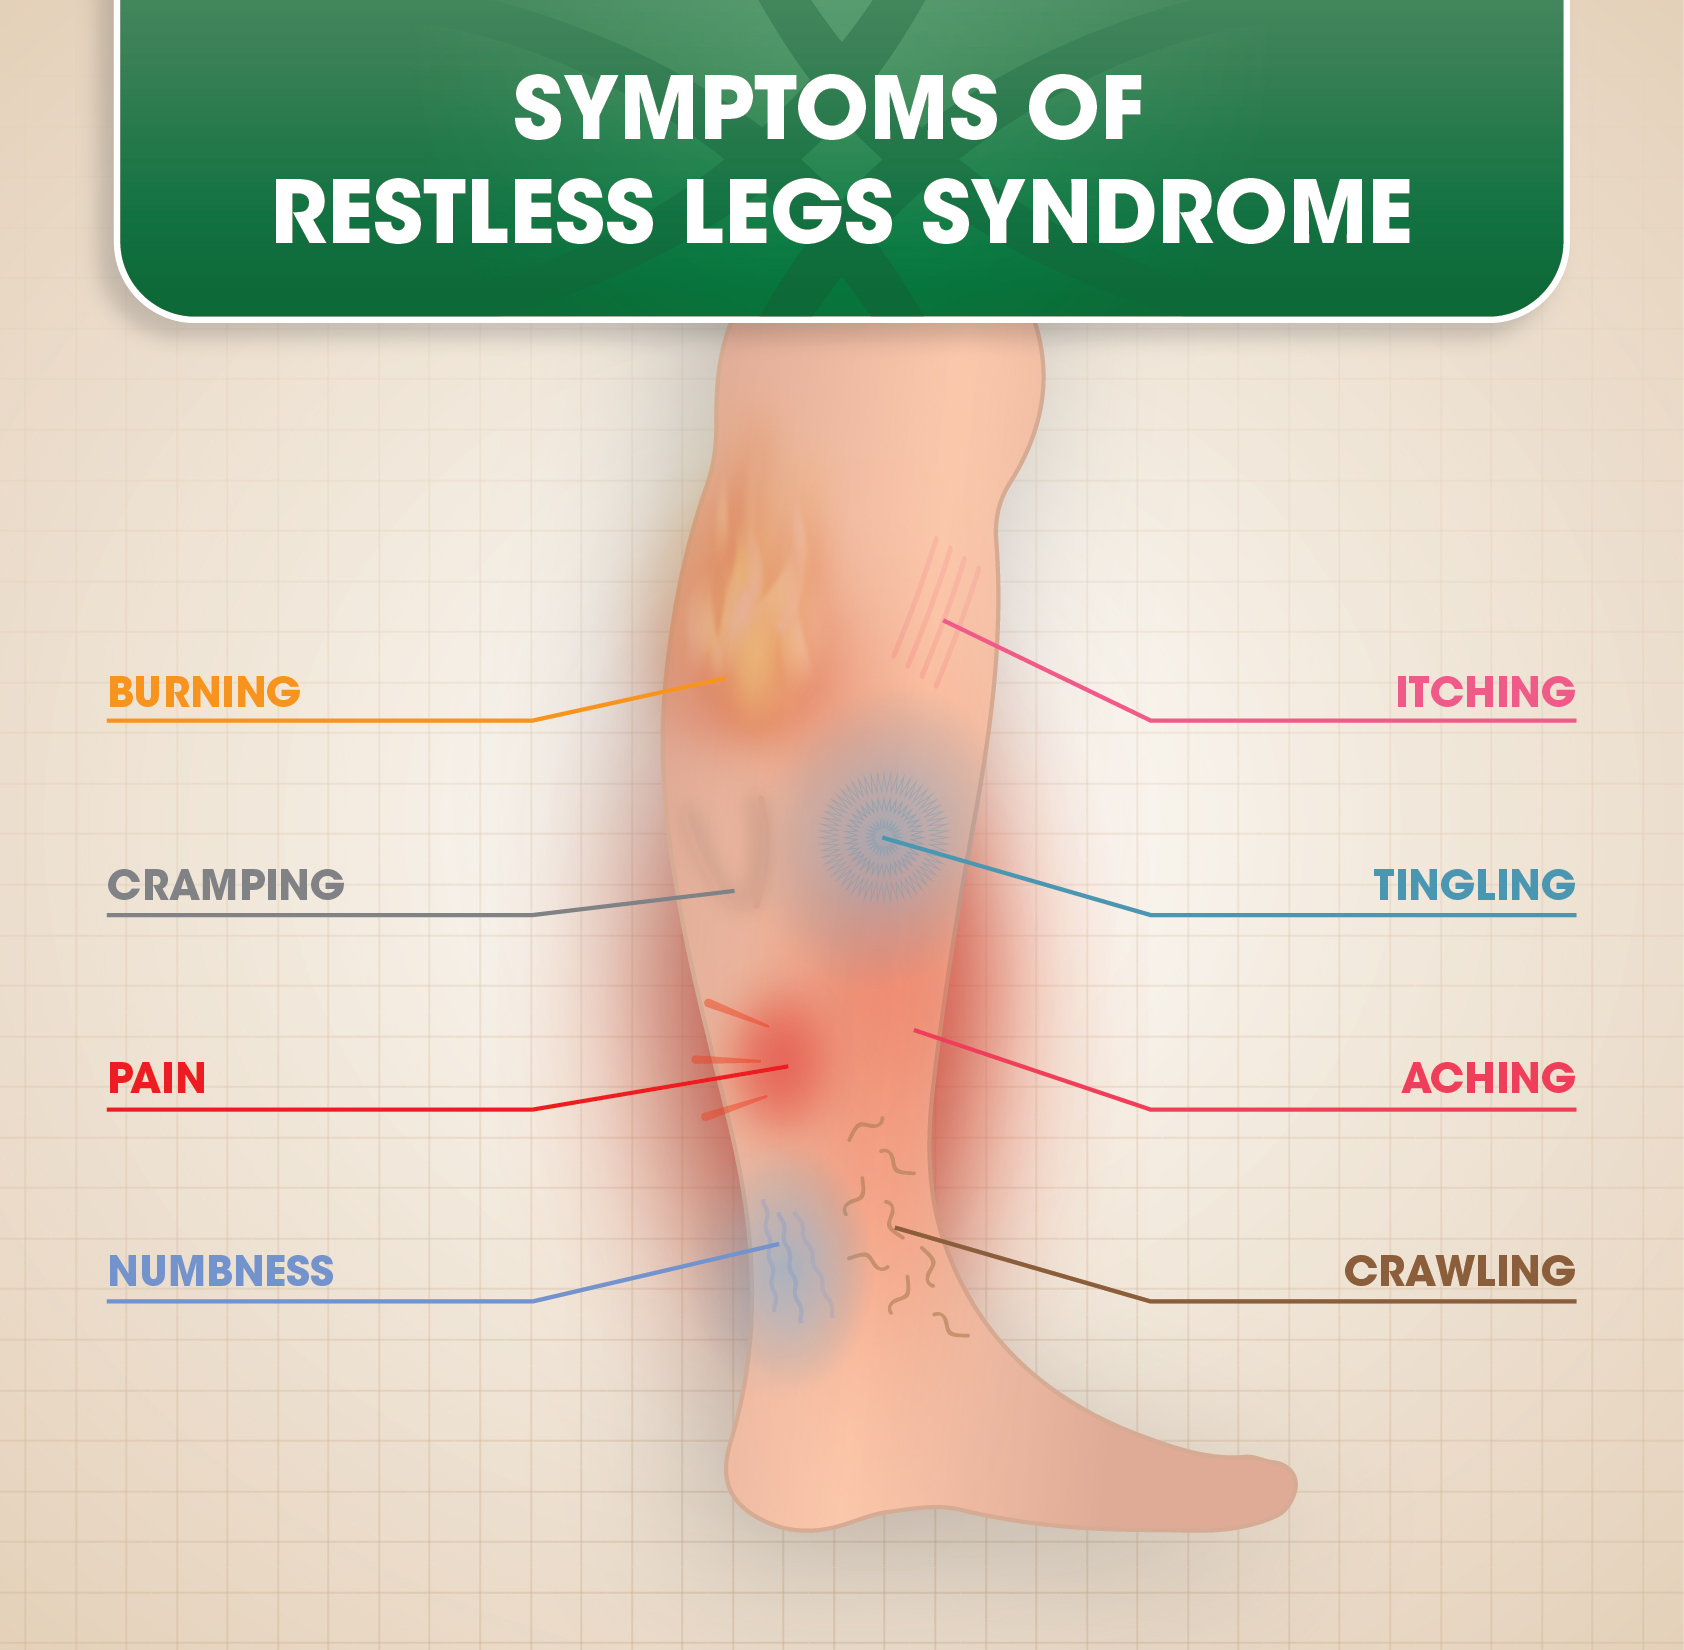 What causes Restless Leg Syndrome?